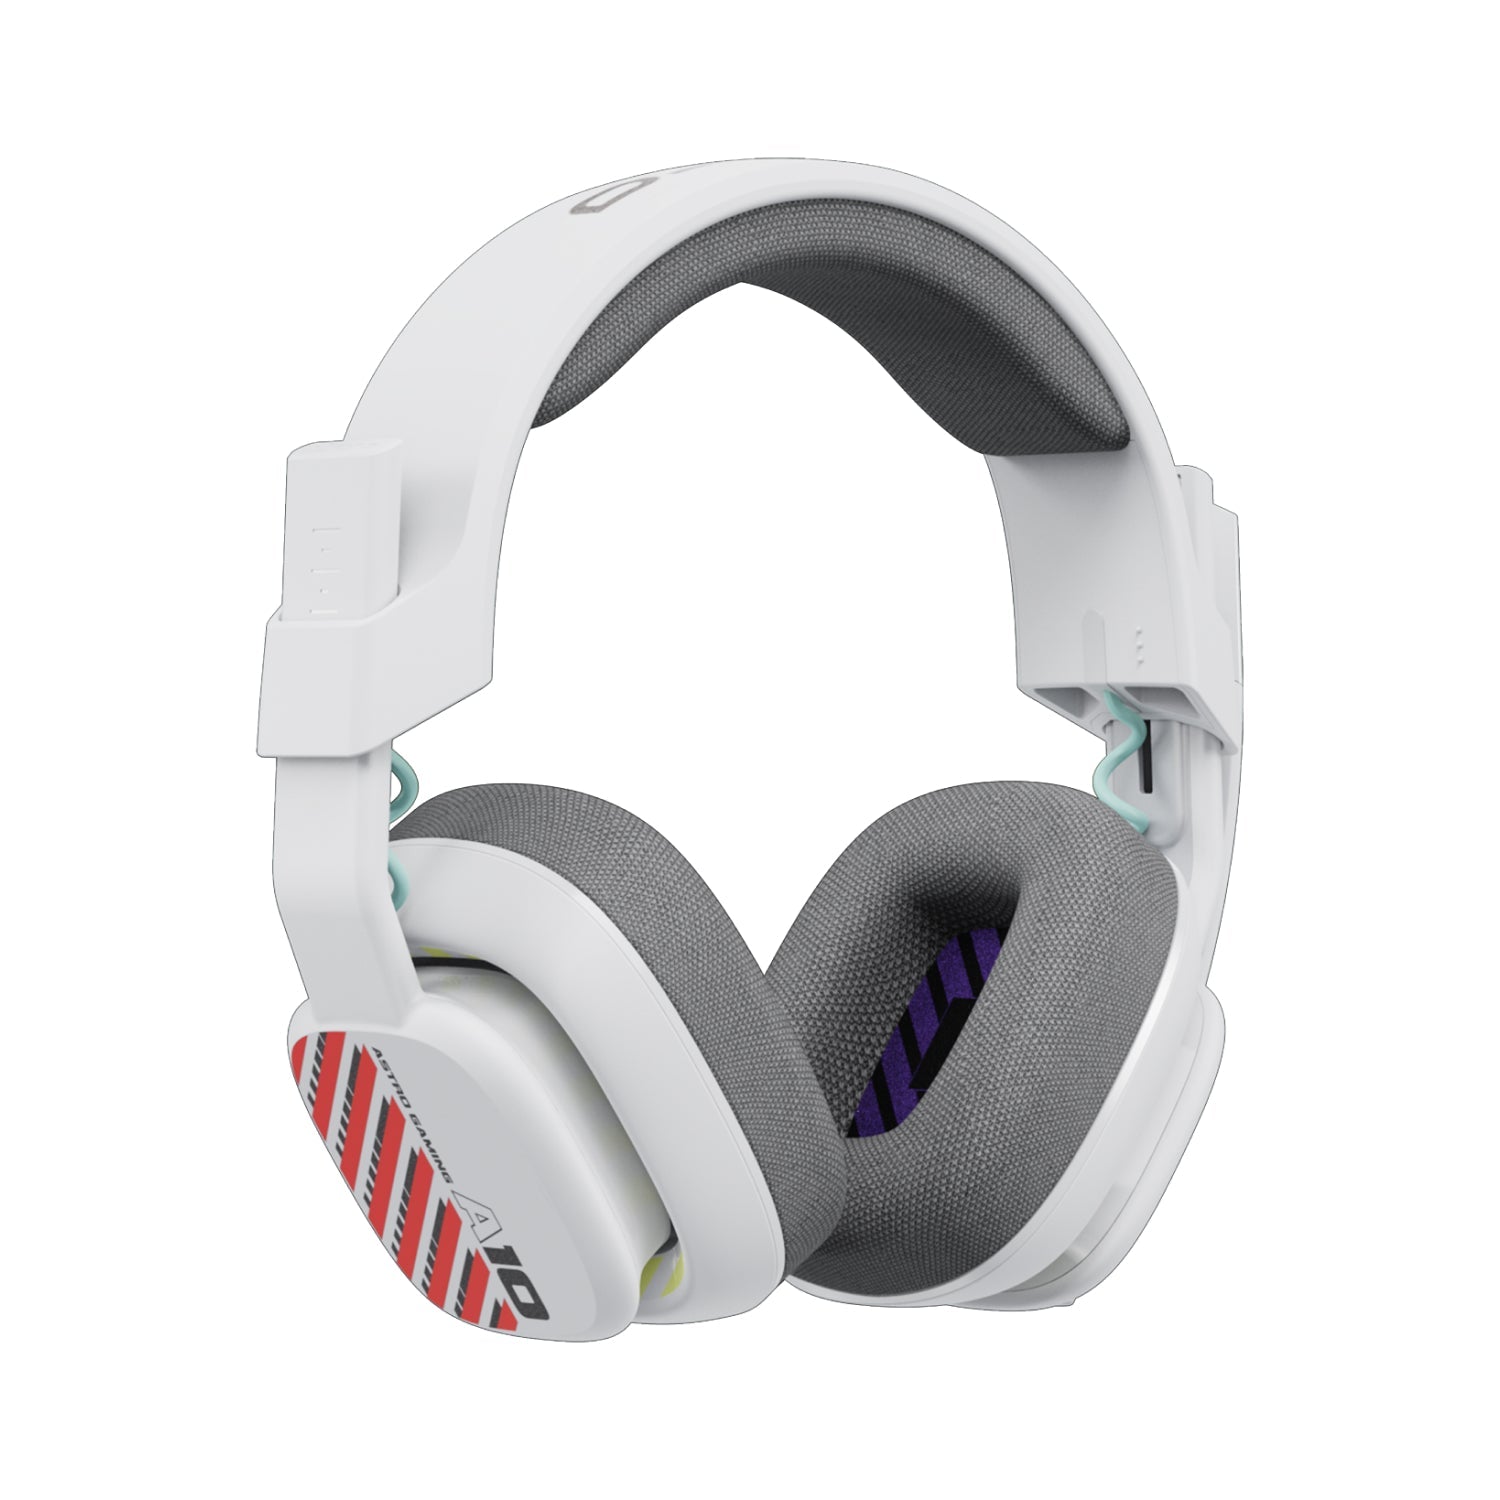 Astro A10 Gaming Headset Gen 2 - Playstation/PC - White